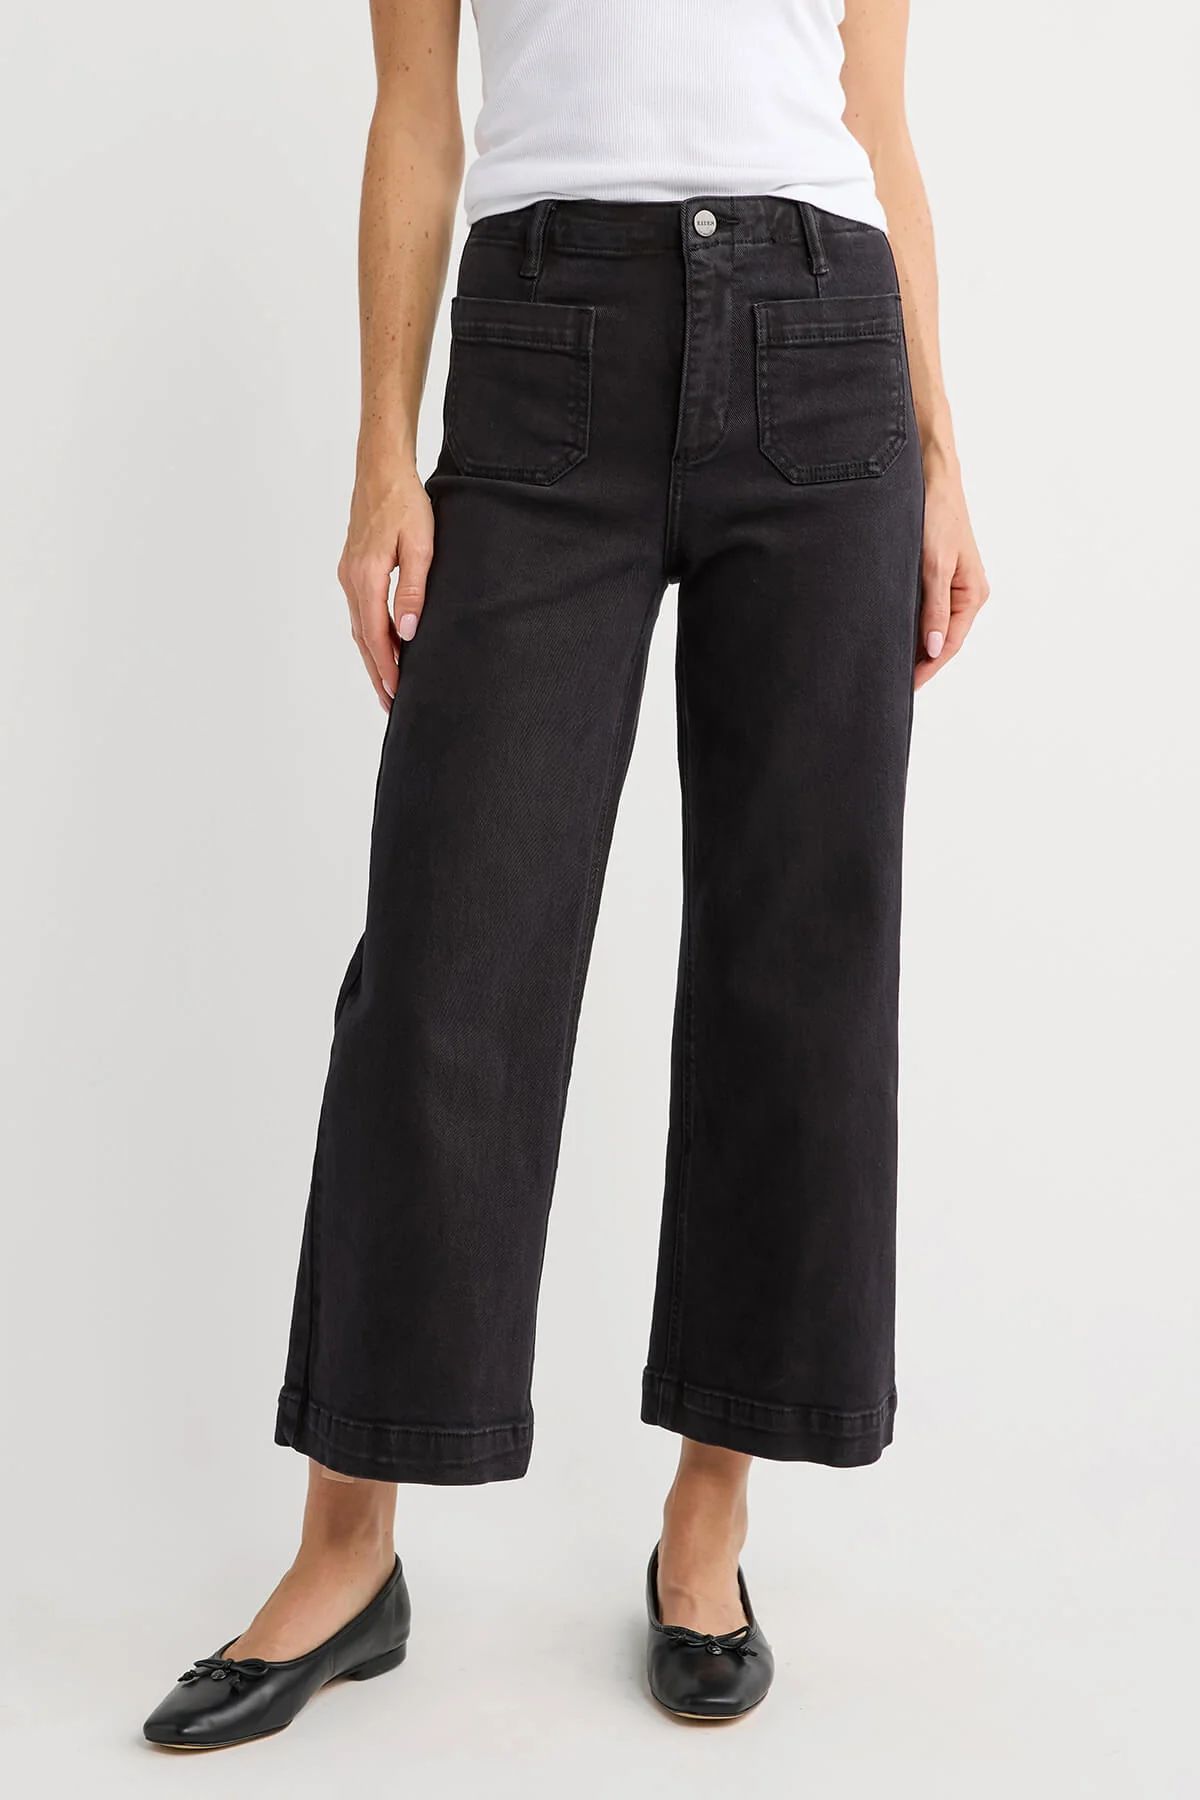 Risen Cropped Patch Pocket Black Jeans | Social Threads